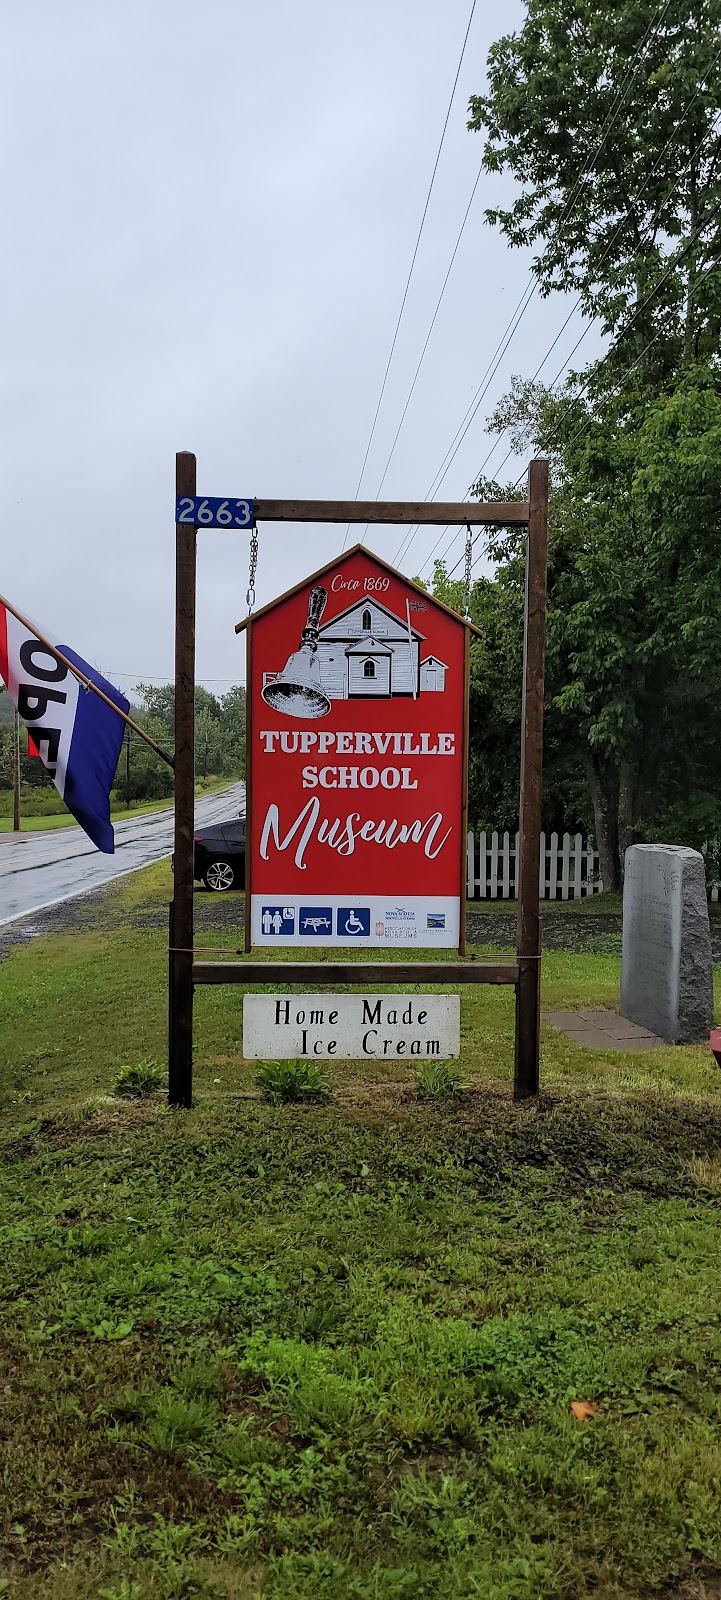 Tupperville School Museum | 2663 NS-201, Tupperville, NS B0S 1C0, Canada | Phone: (902) 665-2579